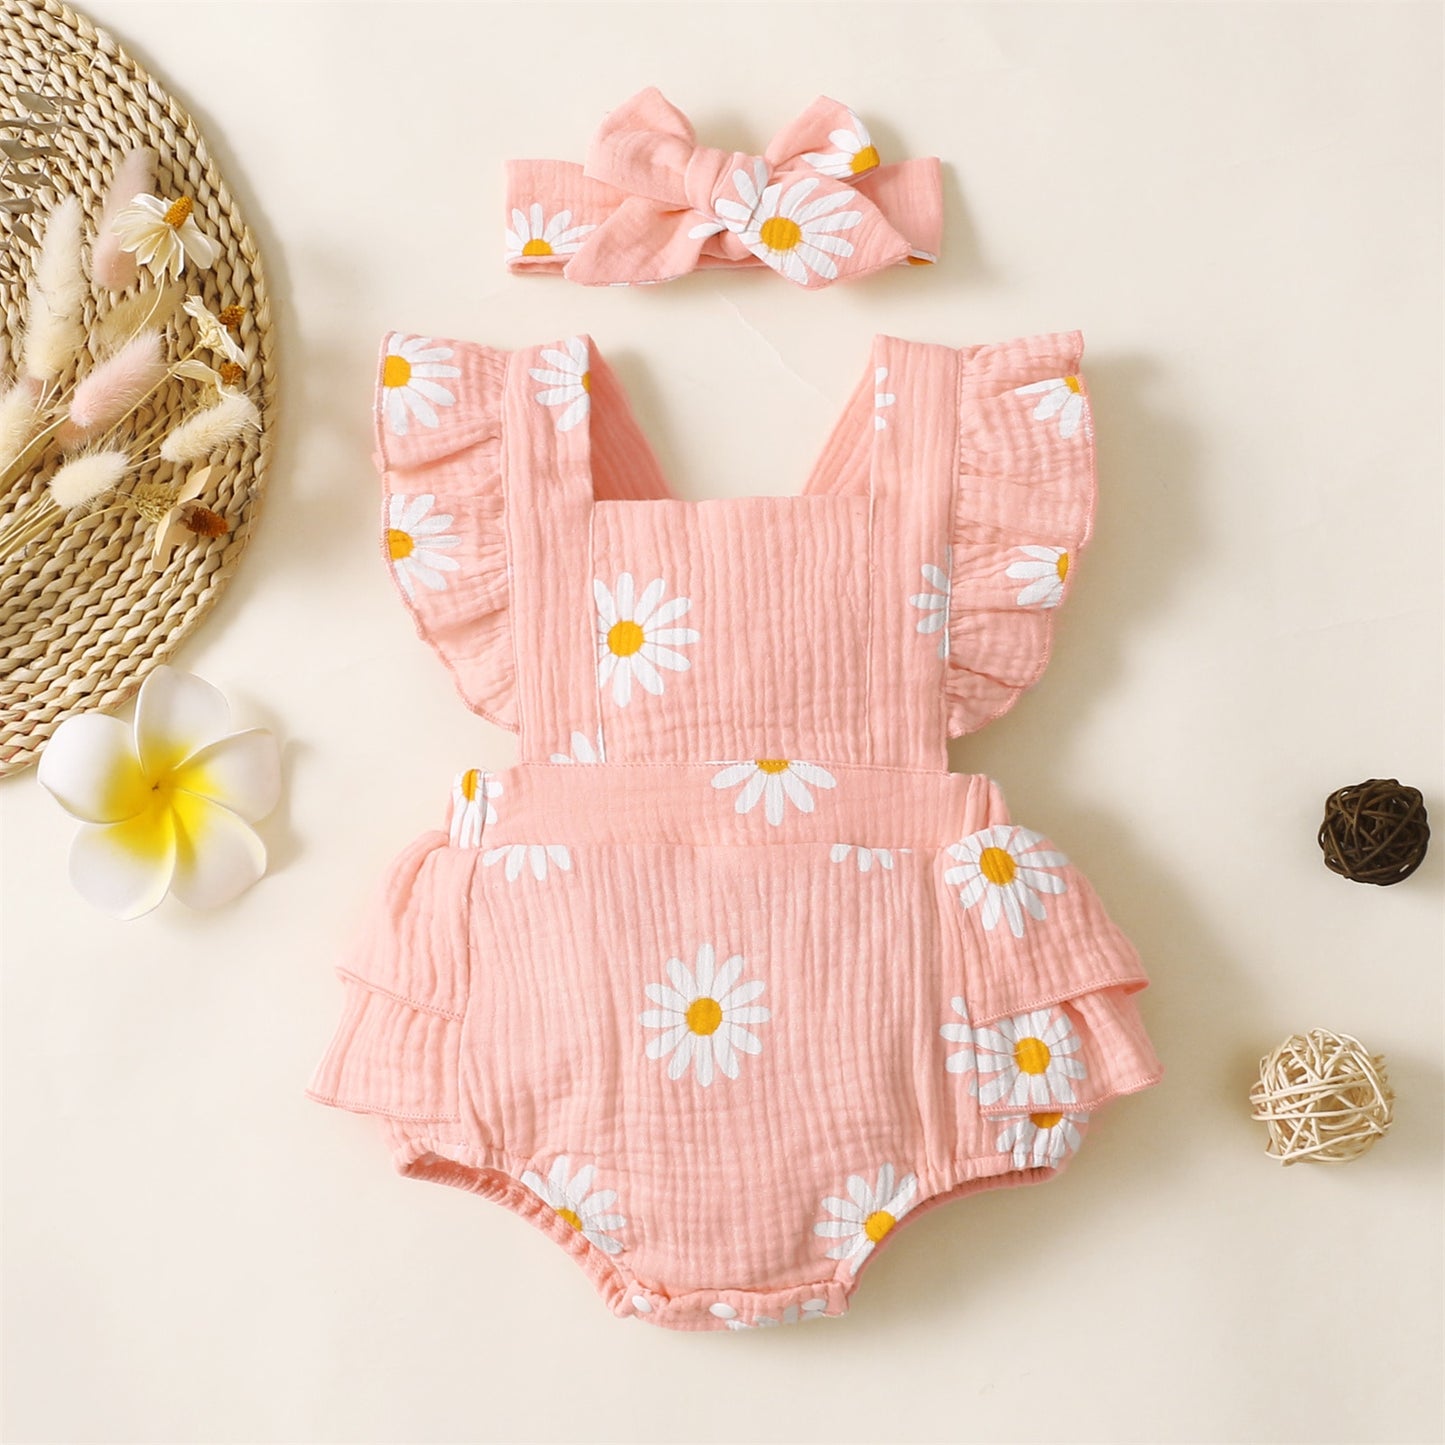 PatPat 100% Cotton 2pcs Baby Girl Bodysuit Daisy Print Crepe Fabric Baby Romper Sets Baby Girls Jumpsuits Clothes